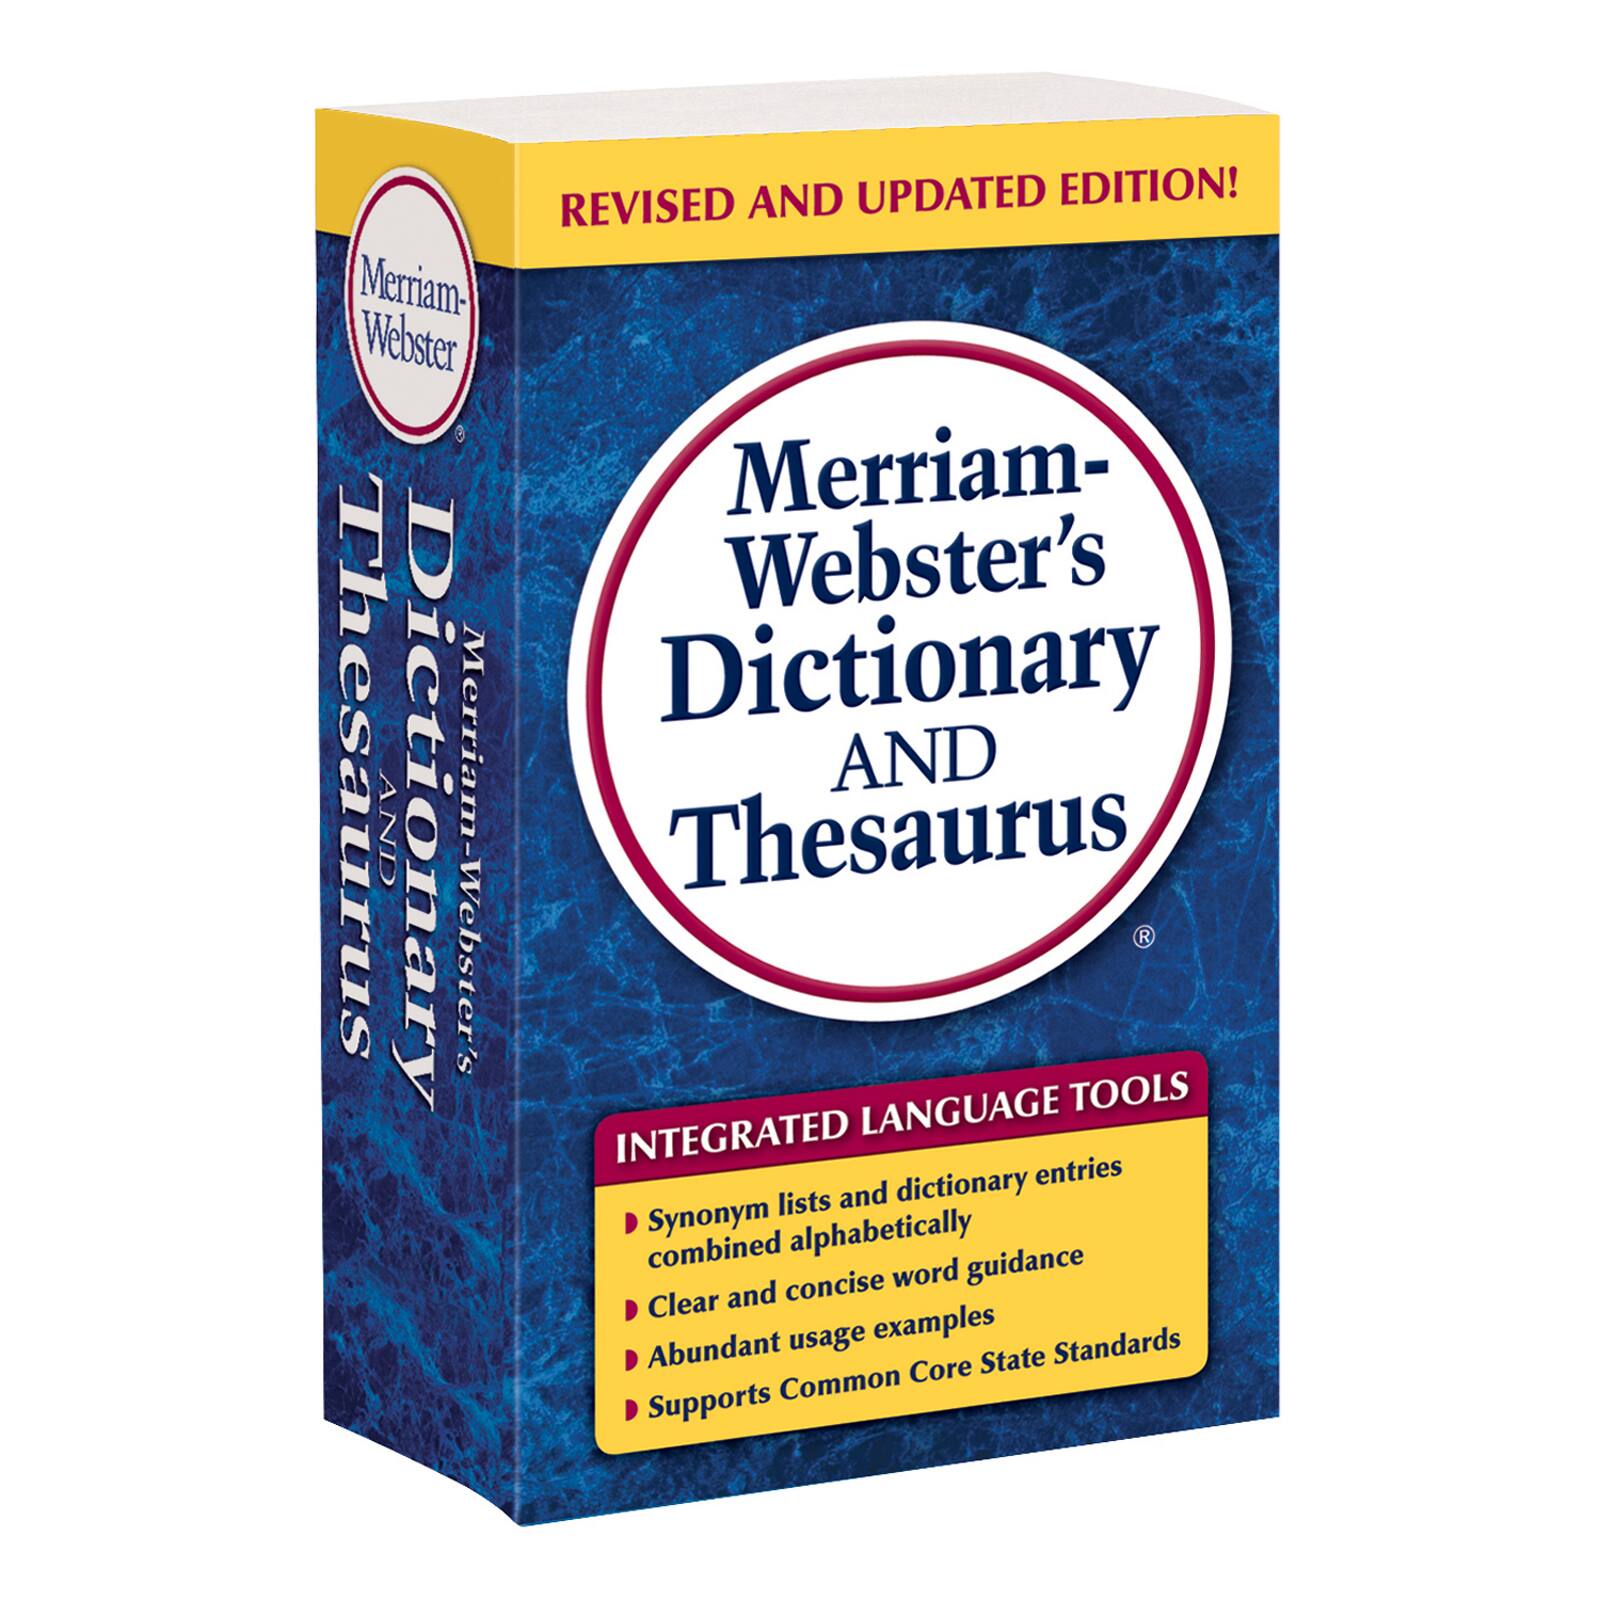 Merriam Websters Dictionary And Thesaurus Michaels 8705